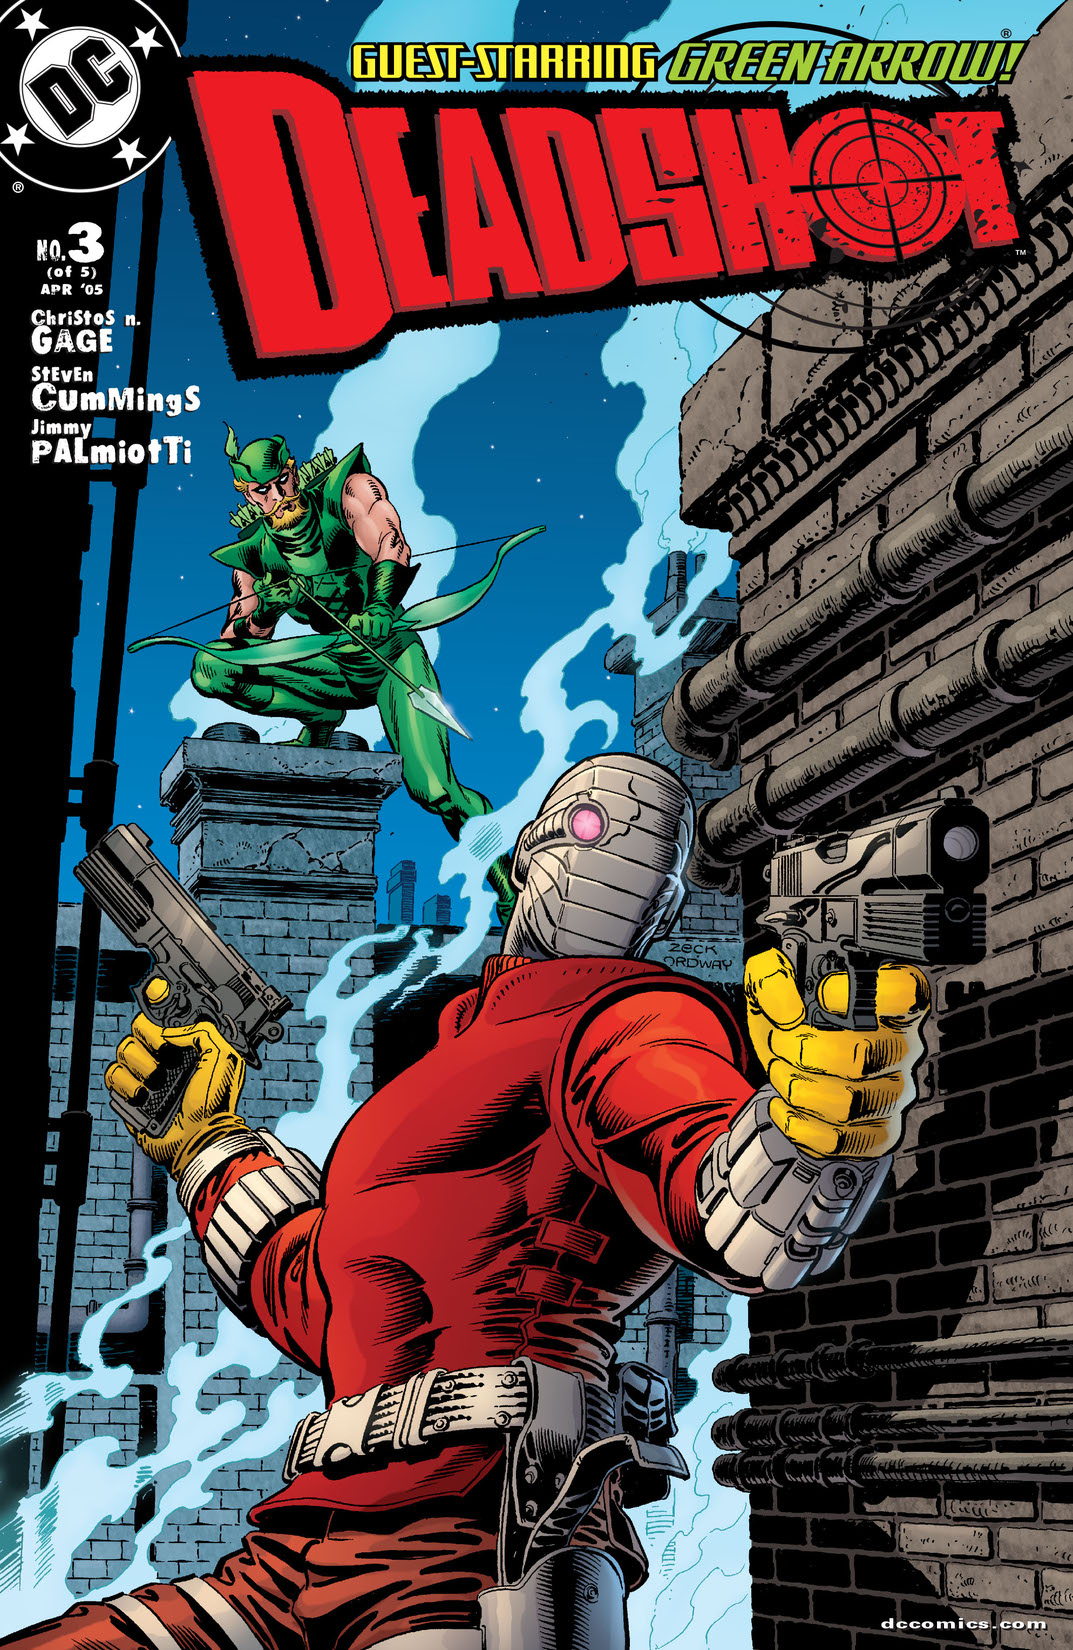 Deadshot (2004-) #3 preview images